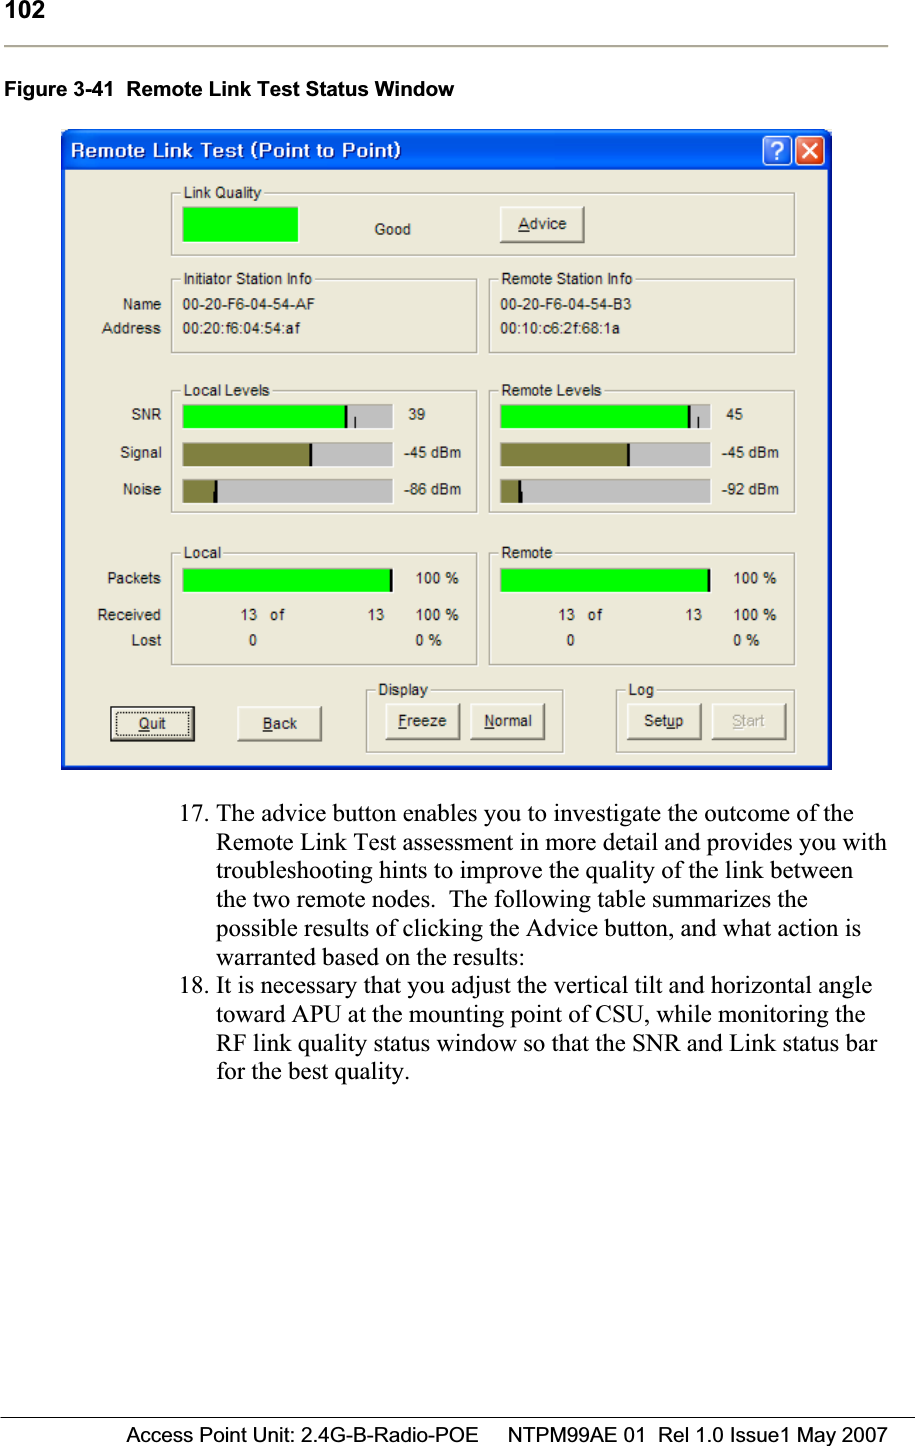 102 Access Point Unit: 2.4G-B-Radio-POE     NTPM99AE 01  Rel 1.0 Issue1 May 2007Figure 3-41  Remote Link Test Status Window 17. The advice button enables you to investigate the outcome of the Remote Link Test assessment in more detail and provides you with troubleshooting hints to improve the quality of the link between the two remote nodes.  The following table summarizes the possible results of clicking the Advice button, and what action is warranted based on the results: 18. It is necessary that you adjust the vertical tilt and horizontal angle toward APU at the mounting point of CSU, while monitoring the RF link quality status window so that the SNR and Link status bar for the best quality. 